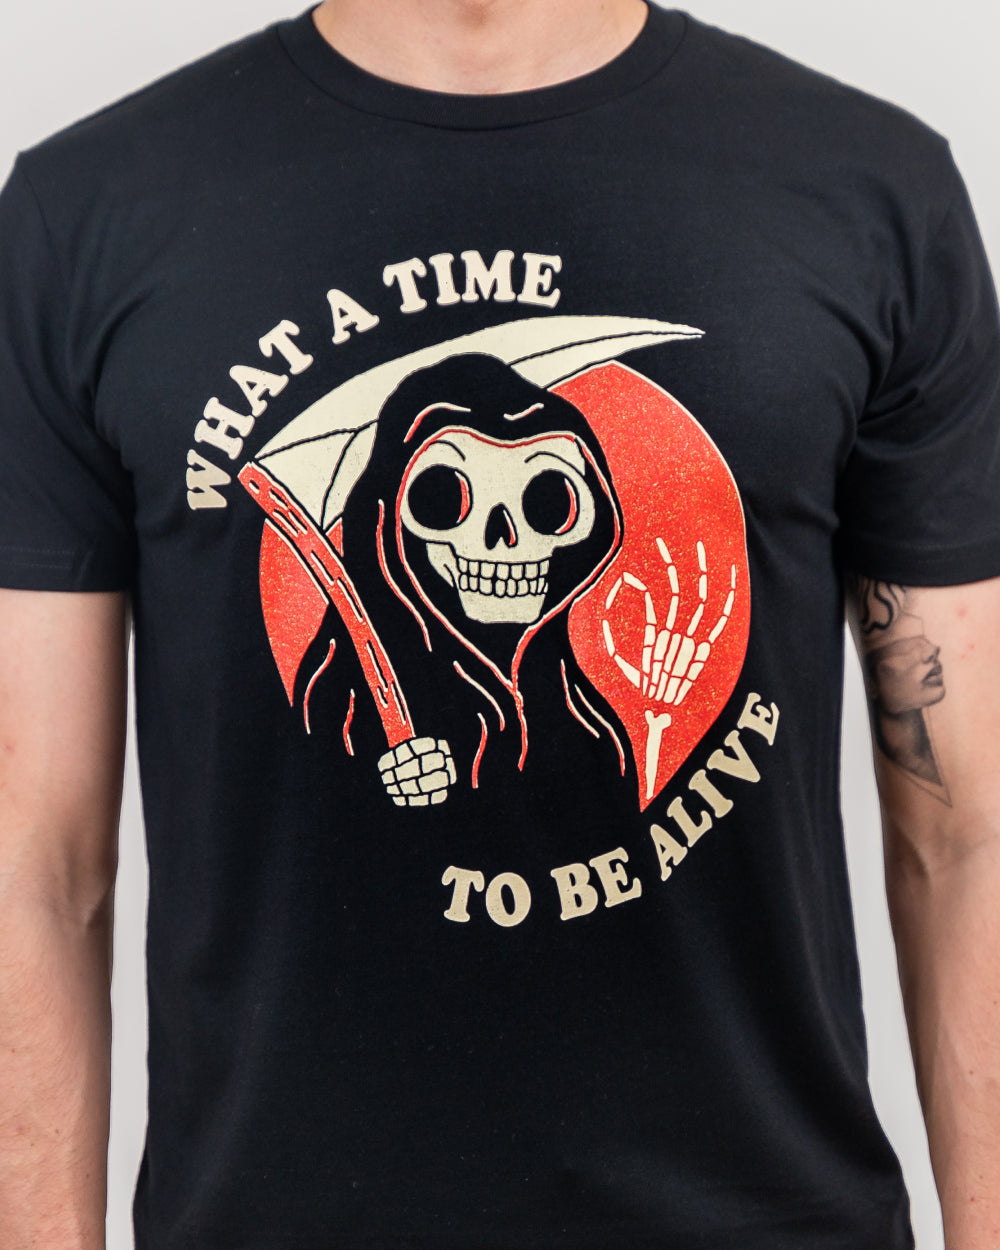 What A Time To Be Alive Funny Humorous Grim Reaper Social Commentary Slogan Cotton T-Shirt